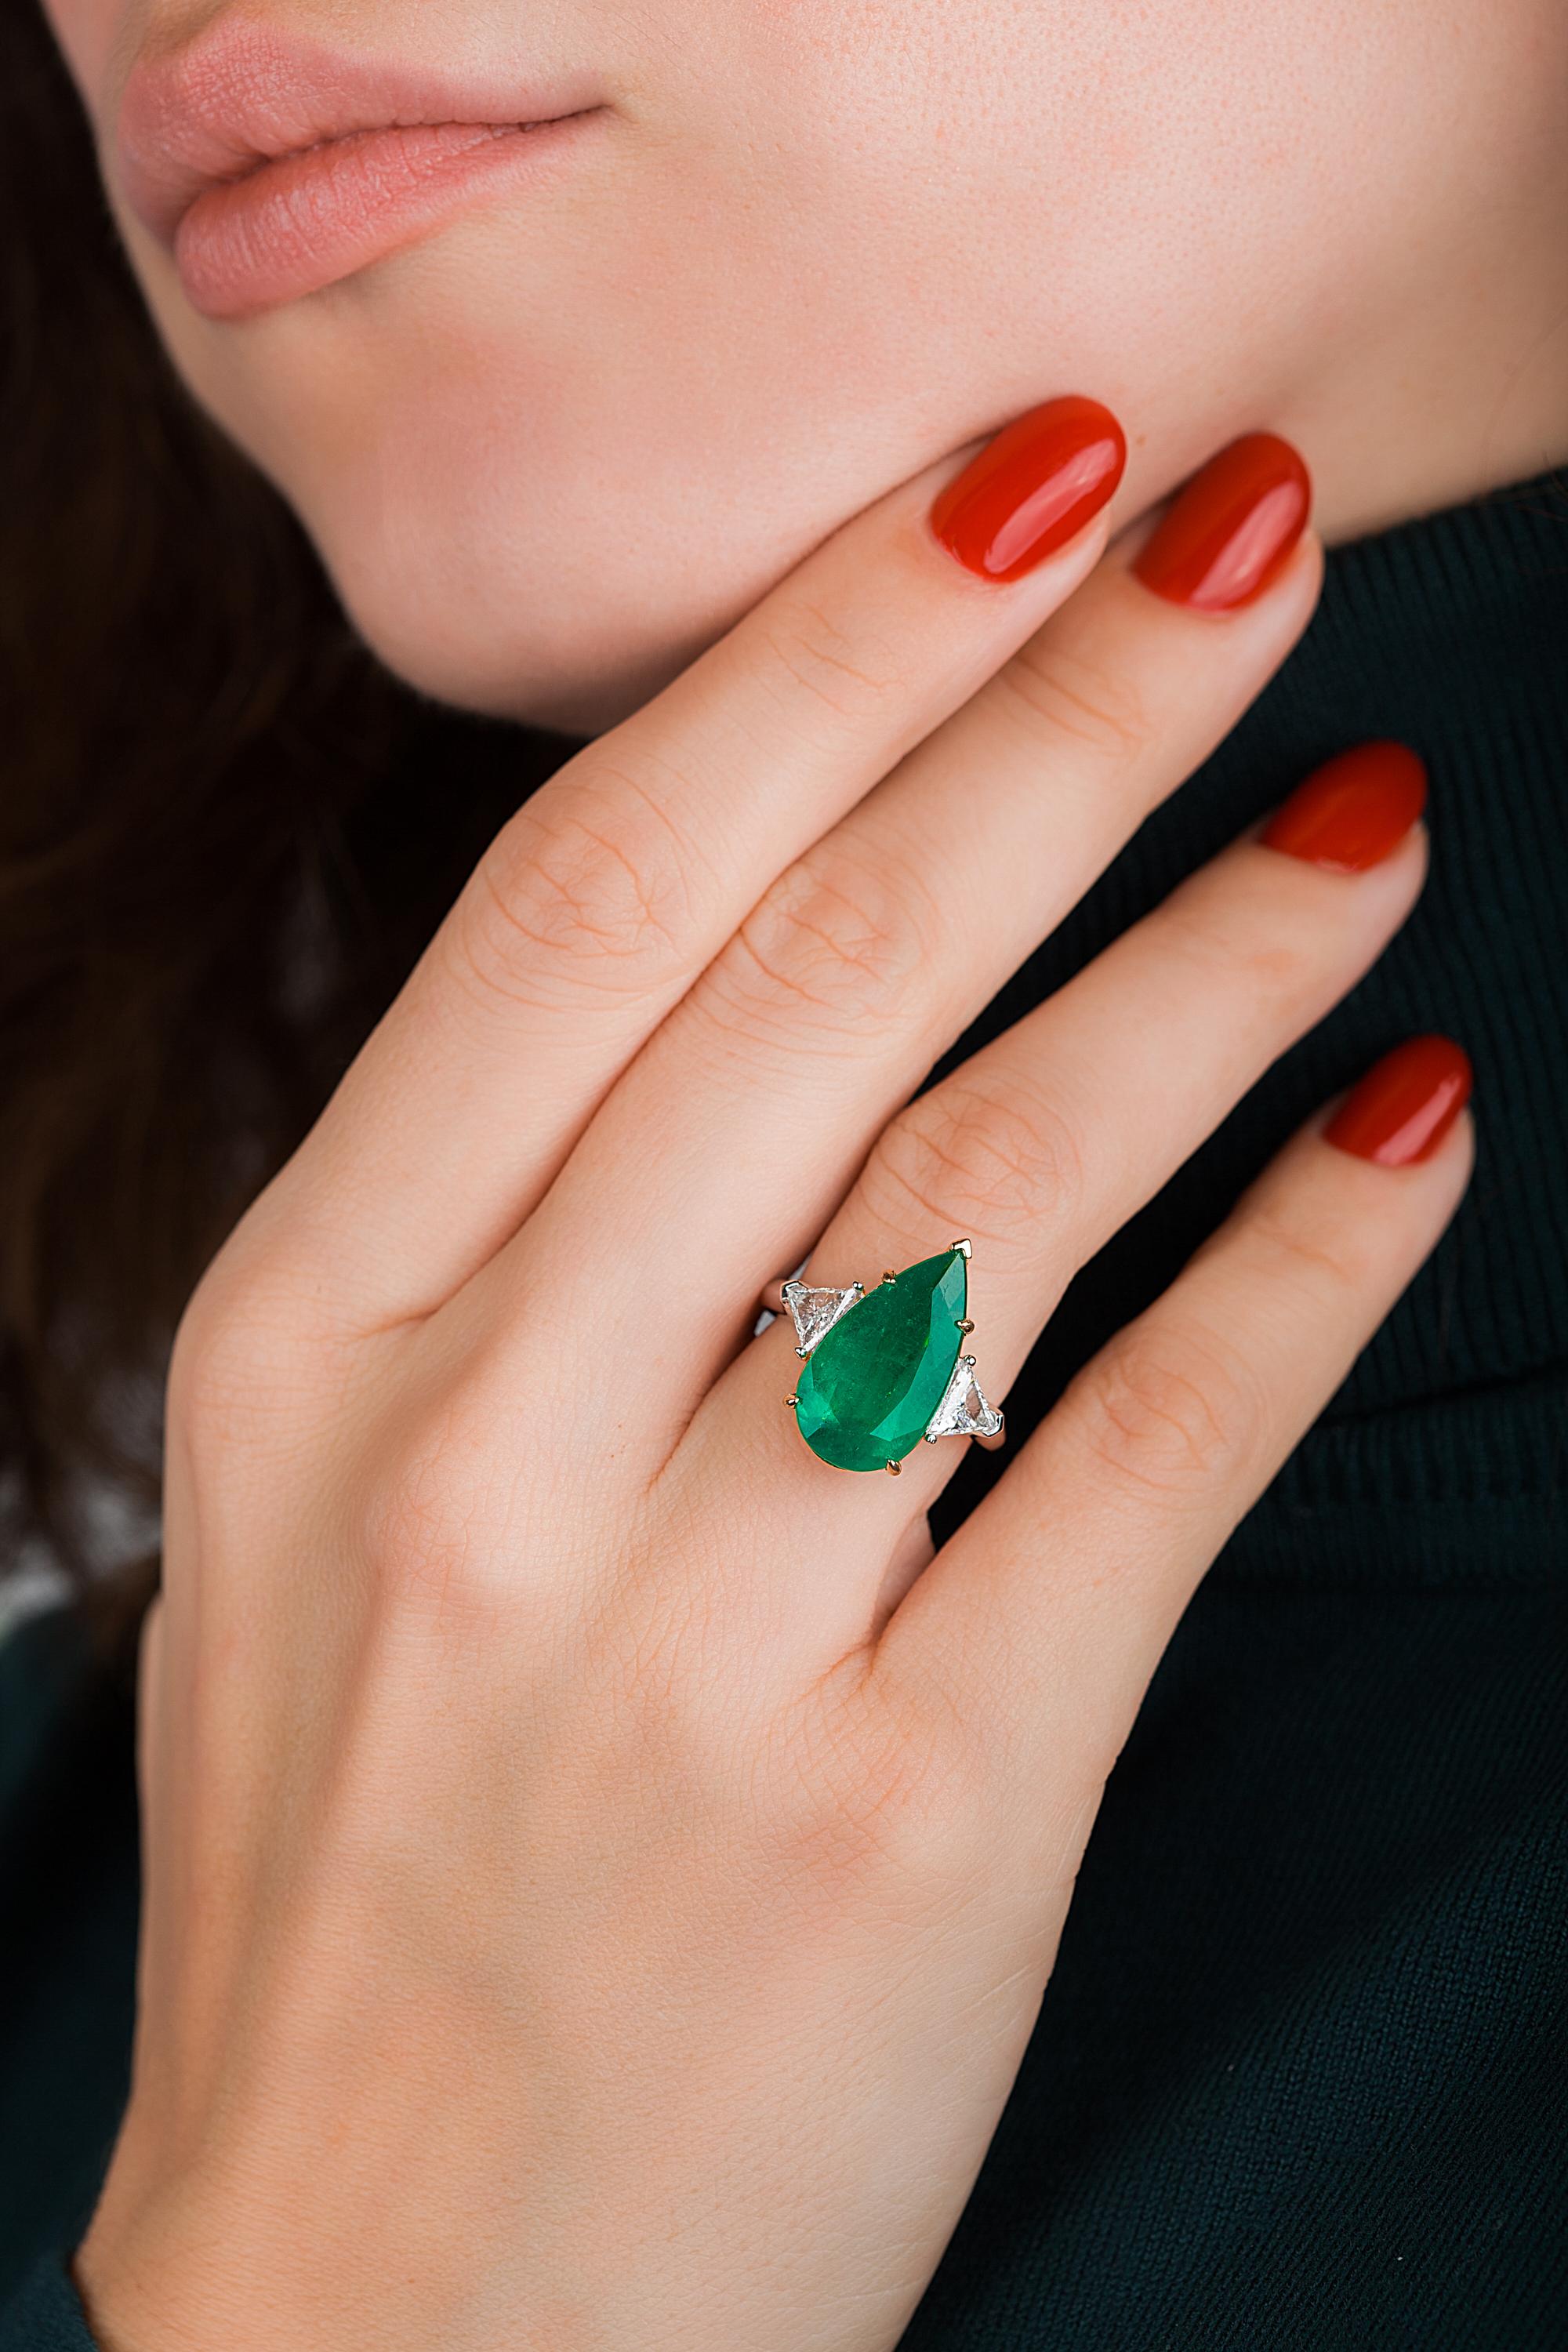 Hand made in the Emilio Jewelry Atelier, our brand is known for creating the finest emerald jewelry and the leader in important Emerald Rings. Emilio Jewelry chooses only the rarest of gems in the world, and Emeralds are our particular expertise.